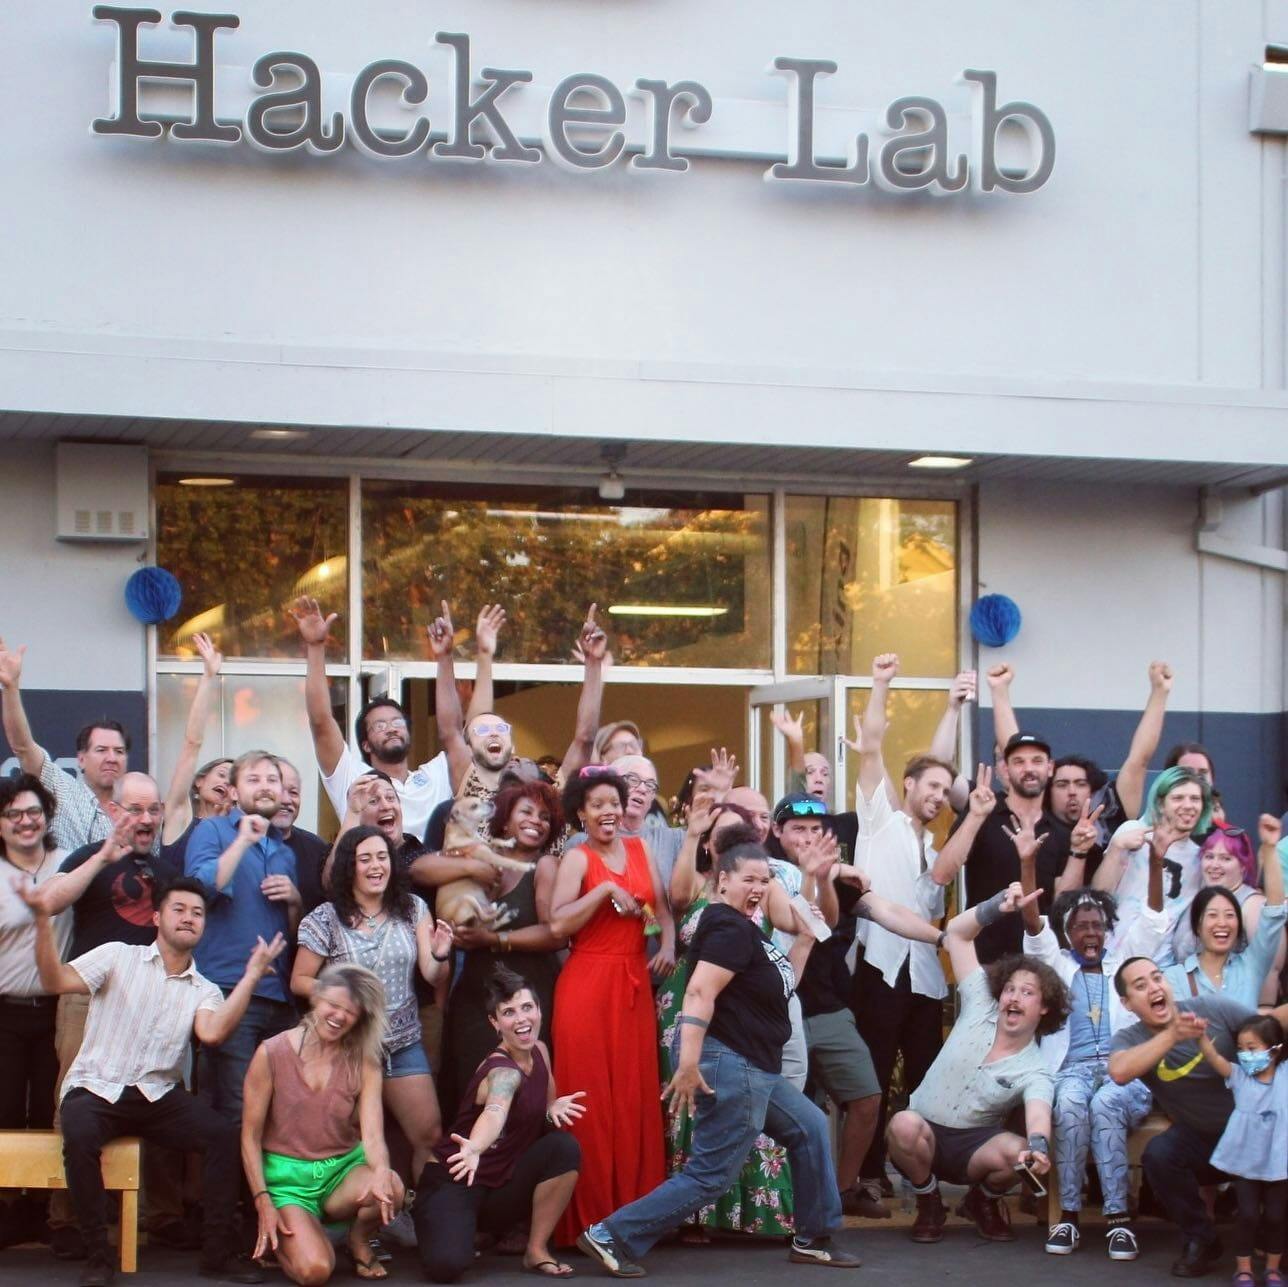 HackerLab coworking space and its members